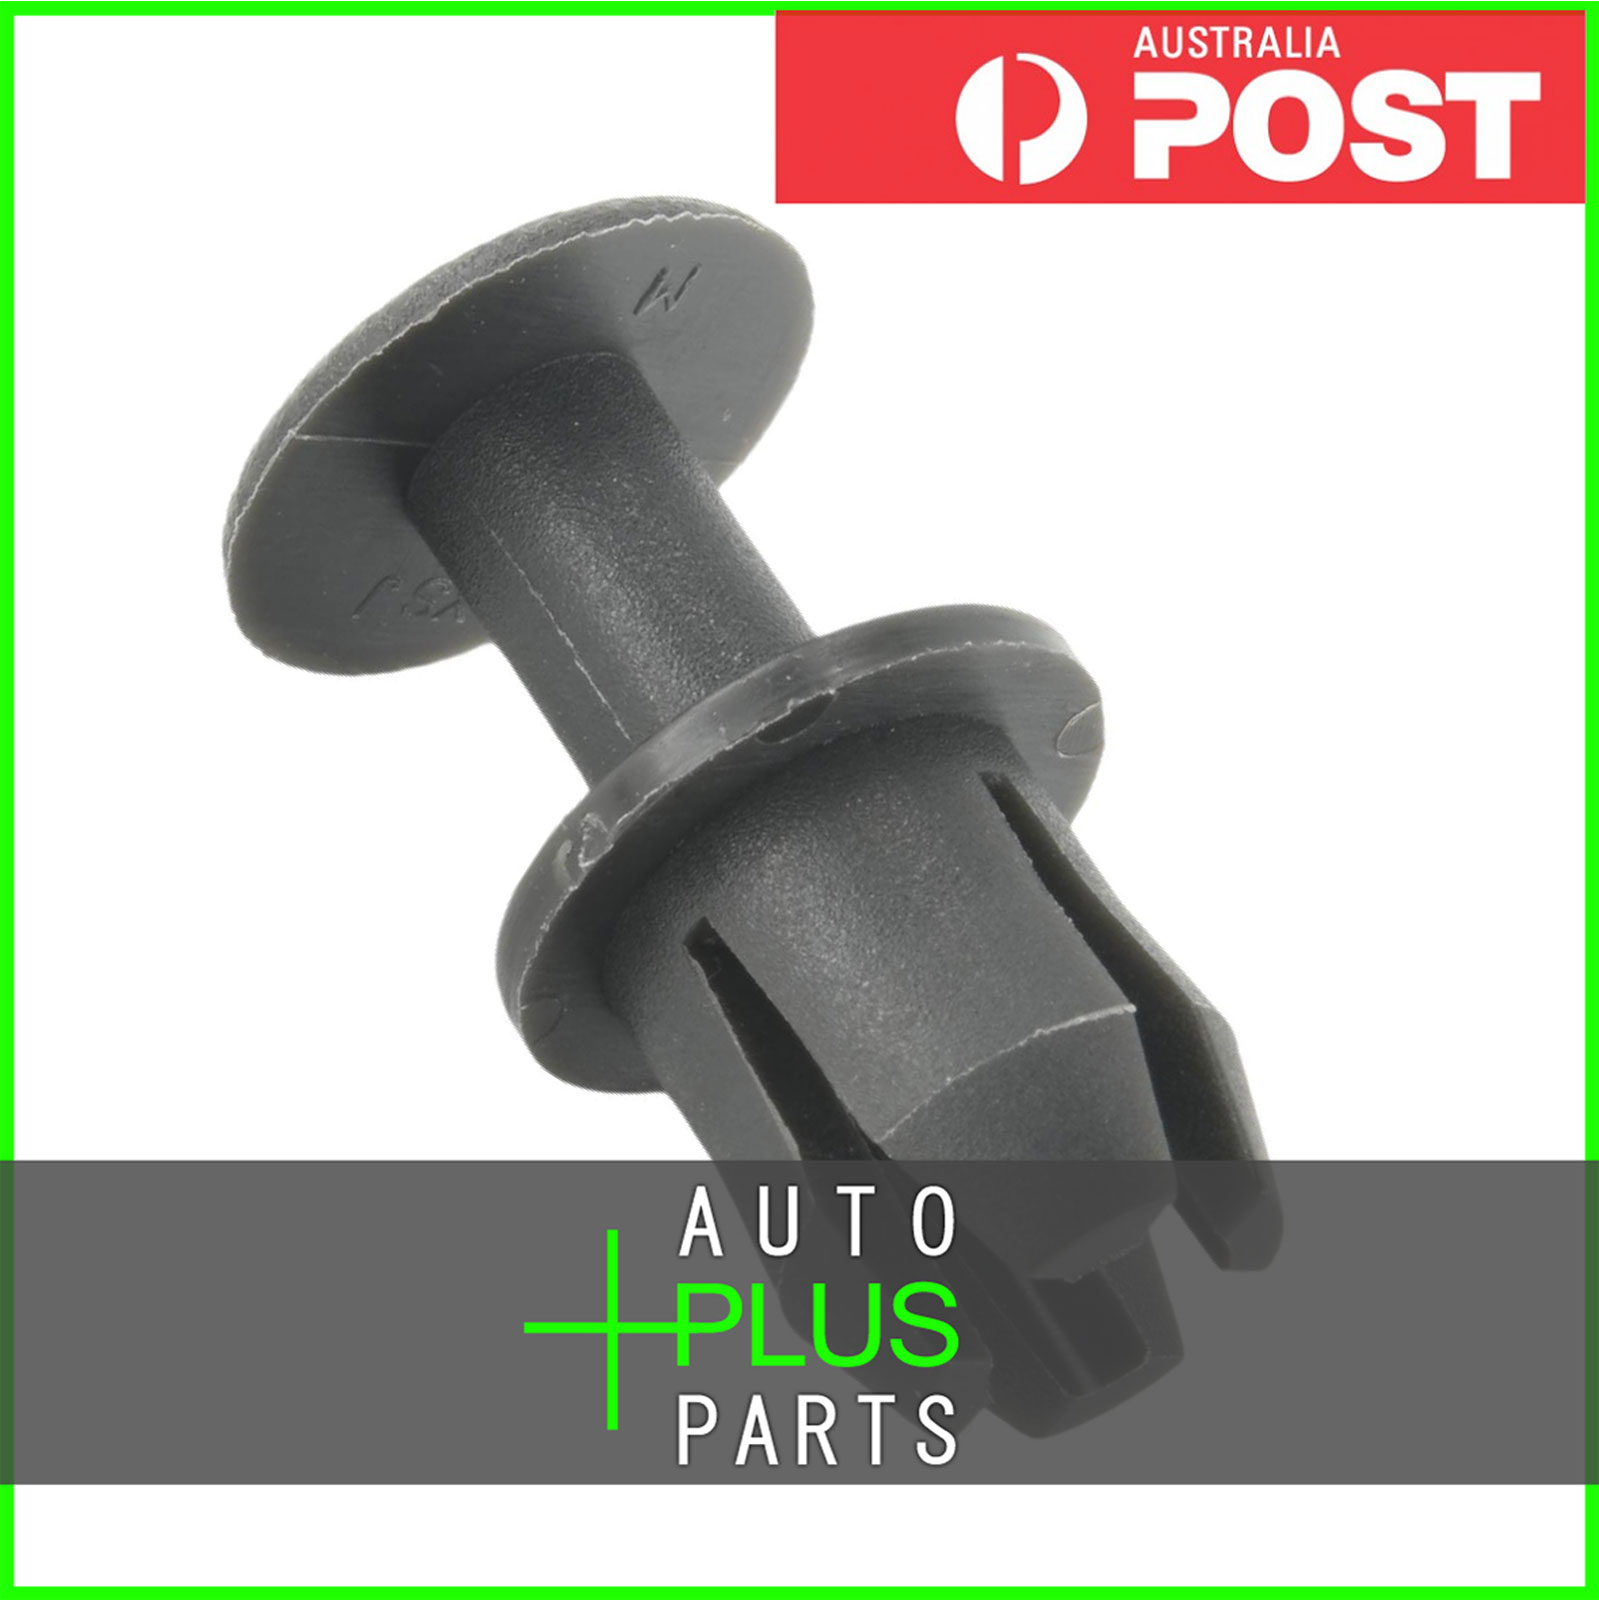 Fits MERCEDES BENZ 300 SEL 3.5,6.3,USA RETAINER CLIP Product Photo